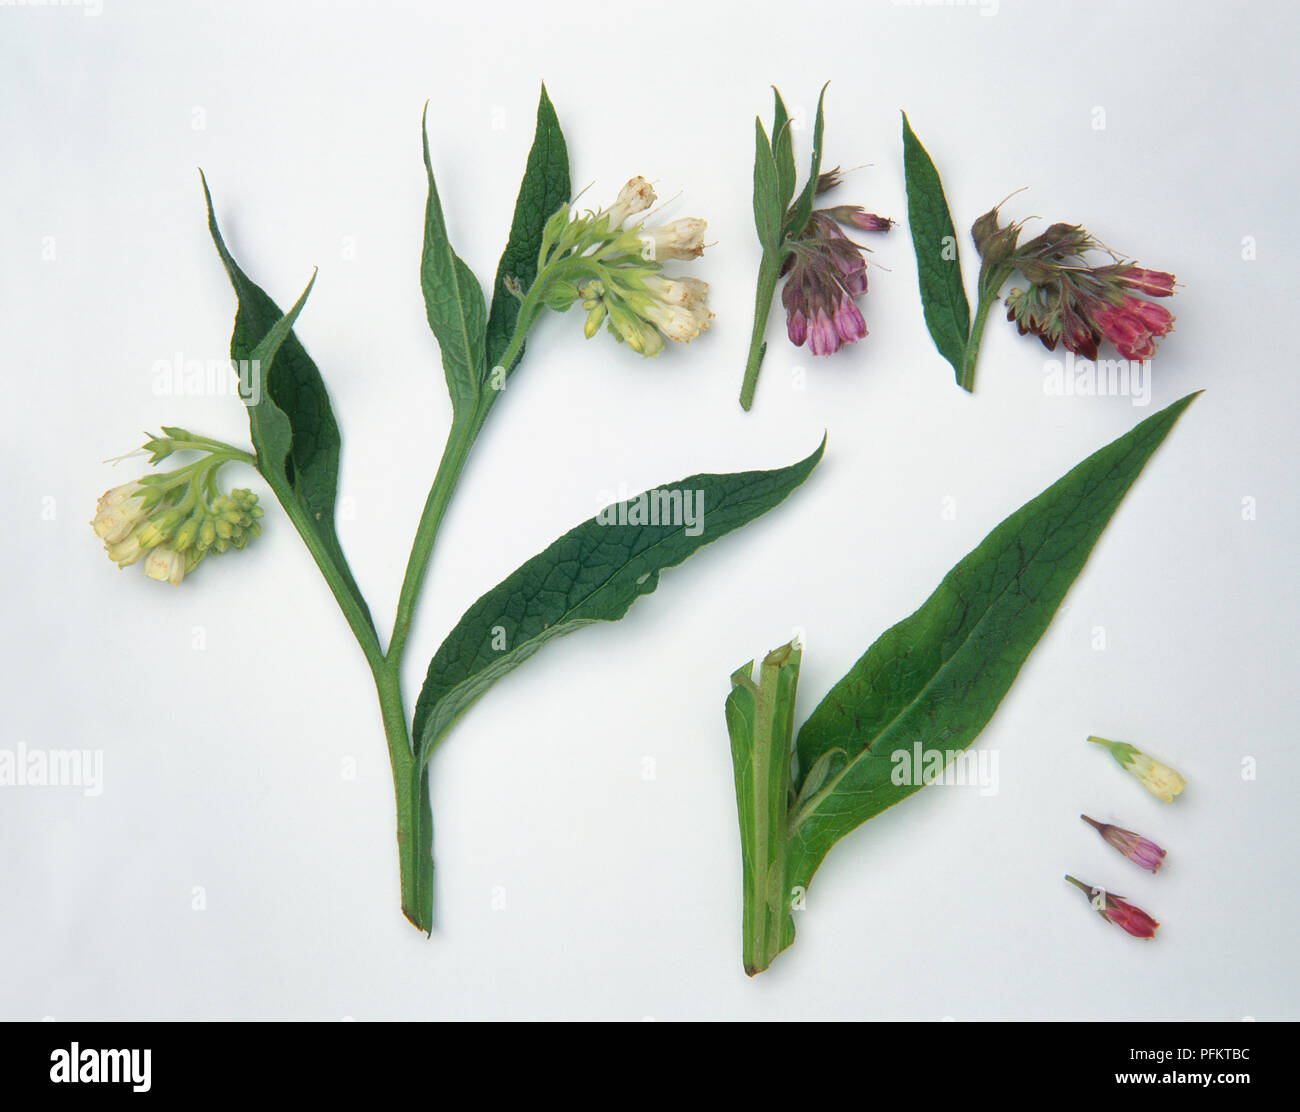 Leaves and range of different coloured flowers from Symphytum officinale (Comfrey), close-up Stock Photo